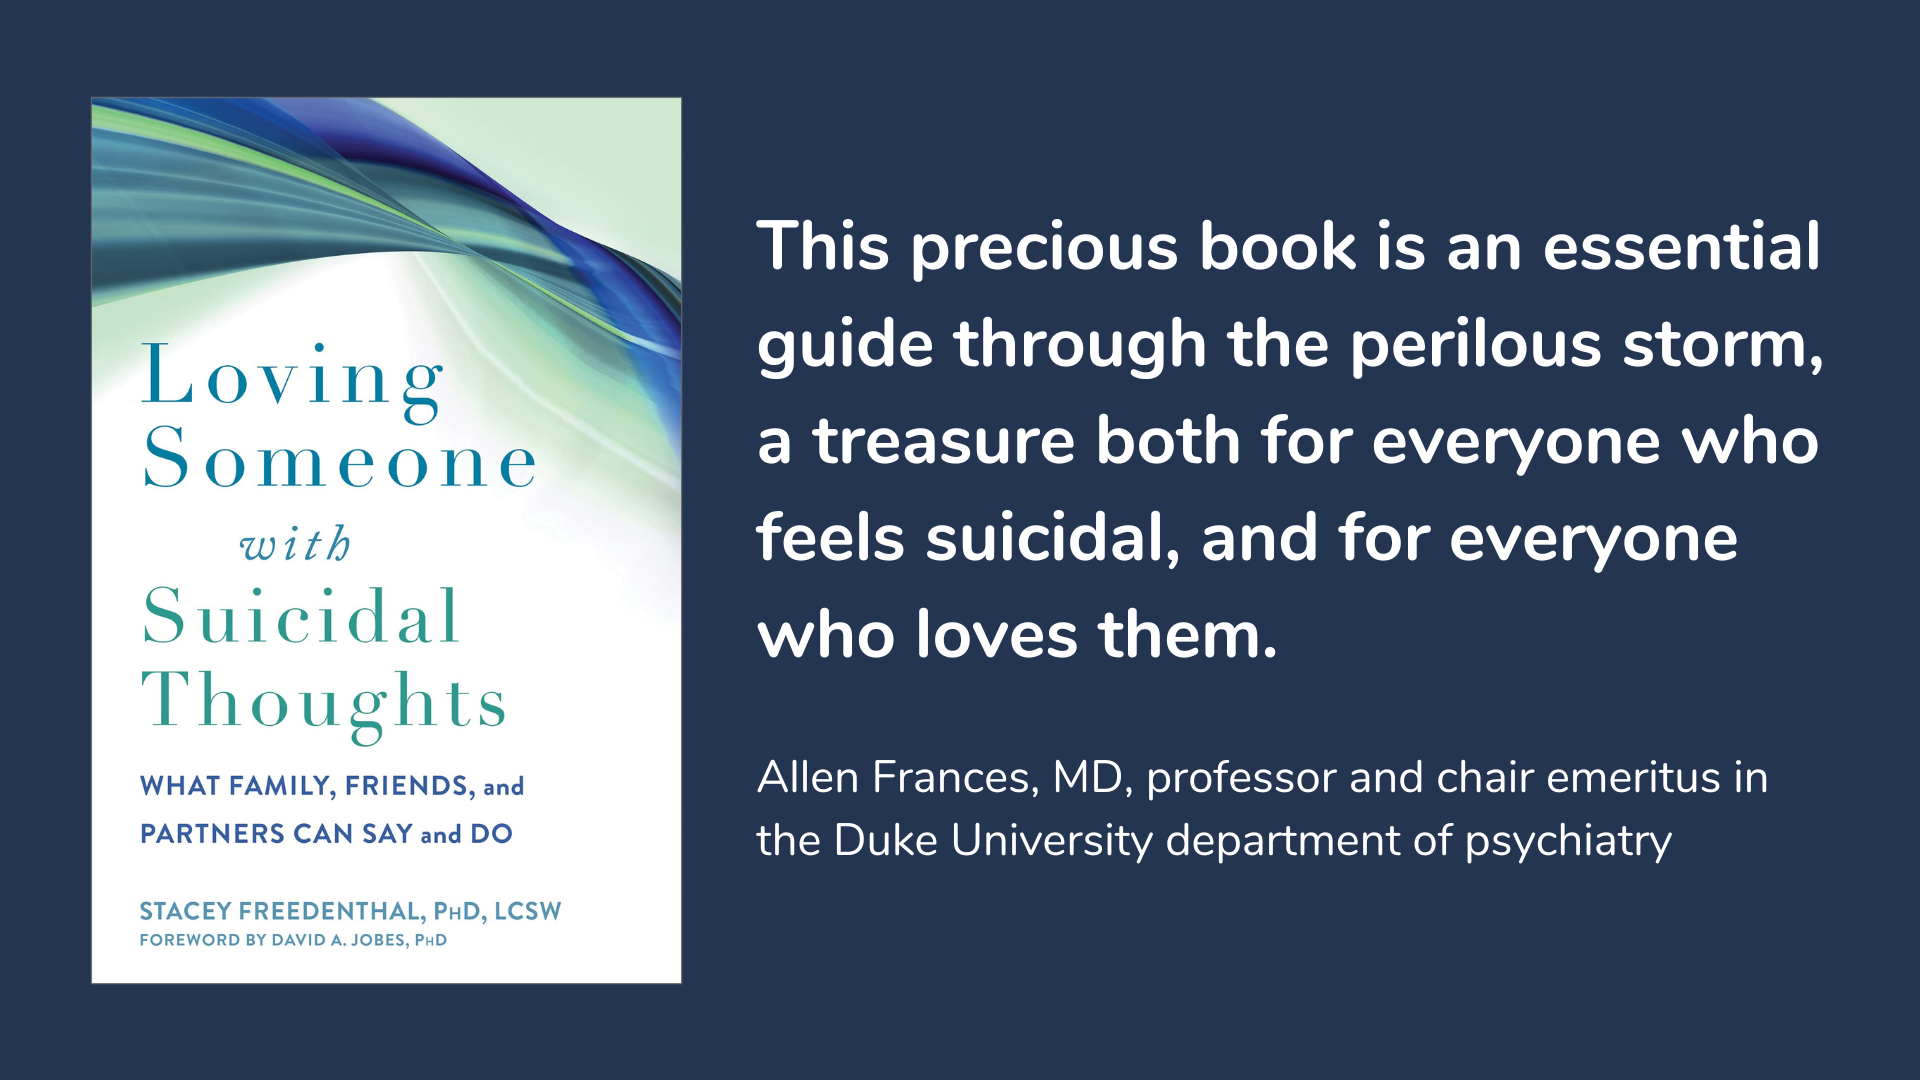 Loving Someone with Suicidal Thoughts: What Family, Friends, and Partners Can Say and Do' by Dr. Stacey Freedenthal, book cover and description